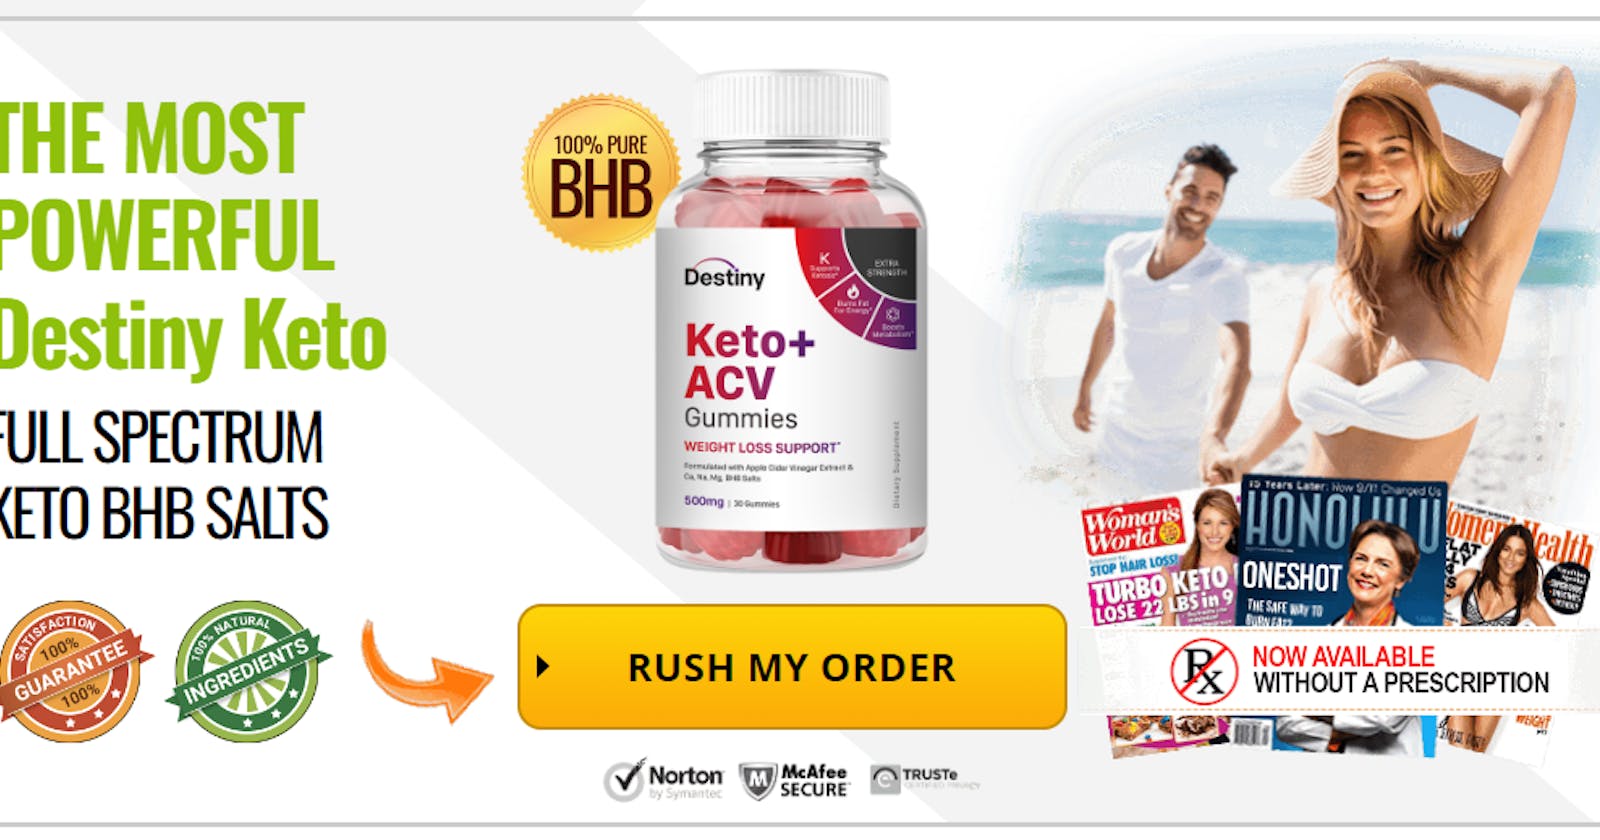 Destiny Keto ACV Gummies Side Effects, Cost Amazon & Where To Buy?